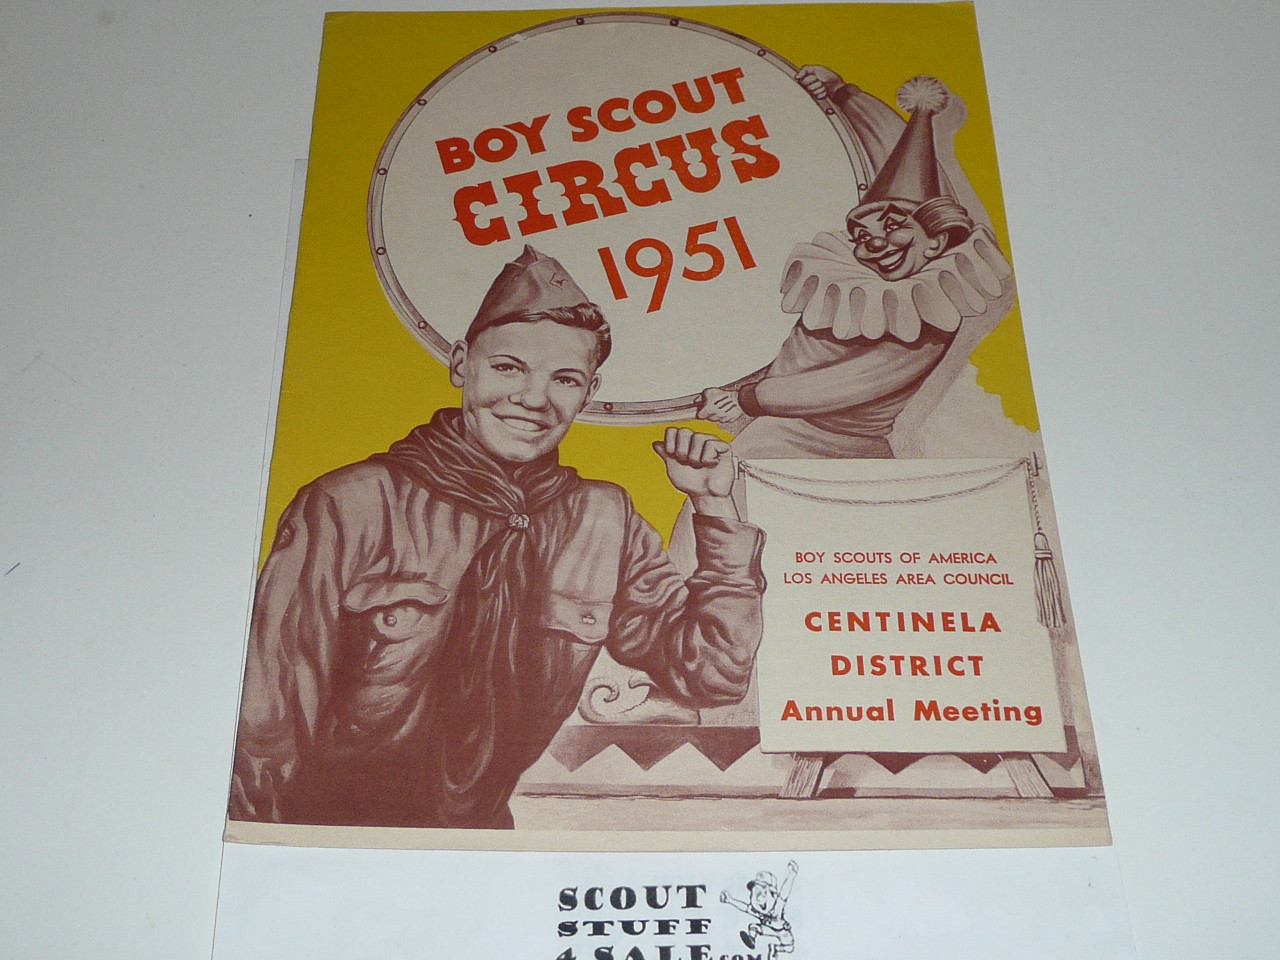 1951 Boy Scout Circus, Centinela District Annual Meeting, Los Angeles Area Council